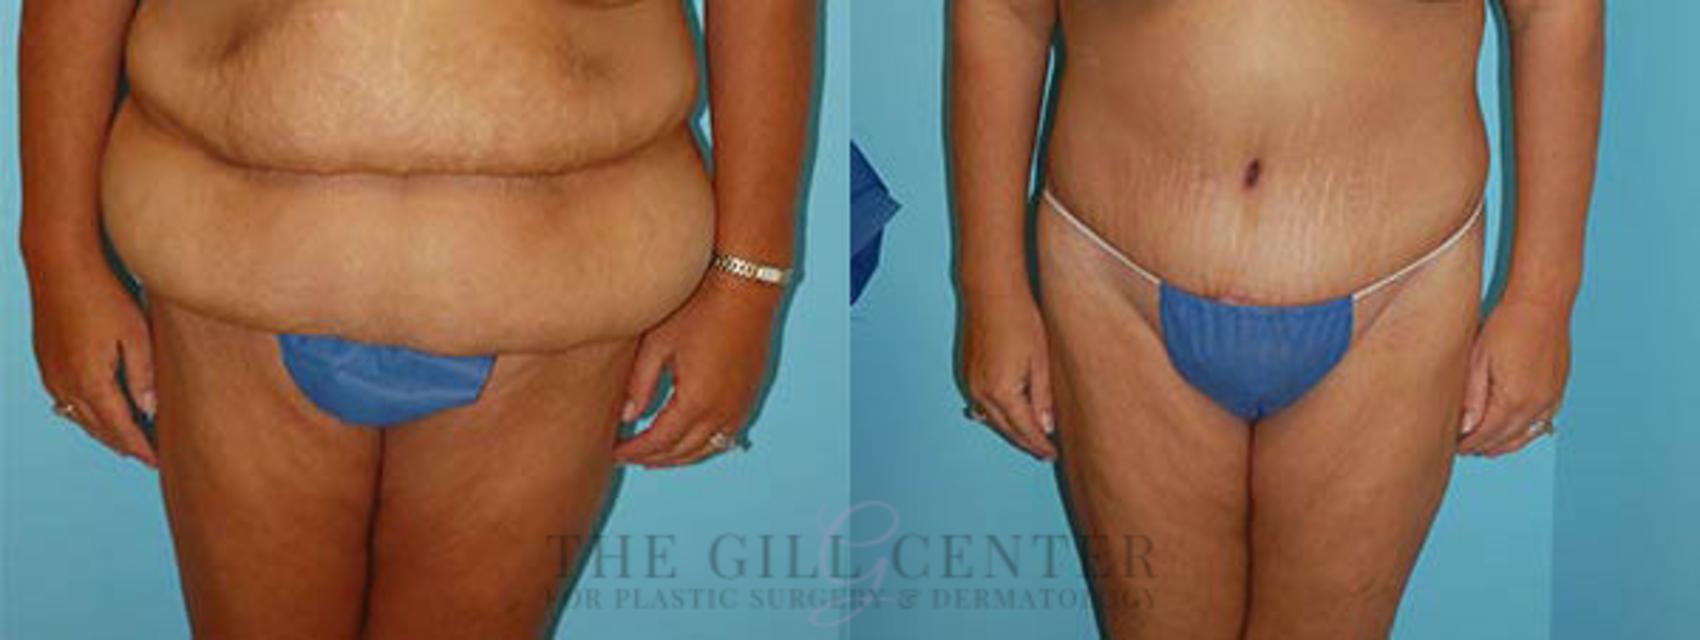 Tummy Tuck Case 229 Before & After Front | The Woodlands, TX | The Gill Center for Plastic Surgery and Dermatology